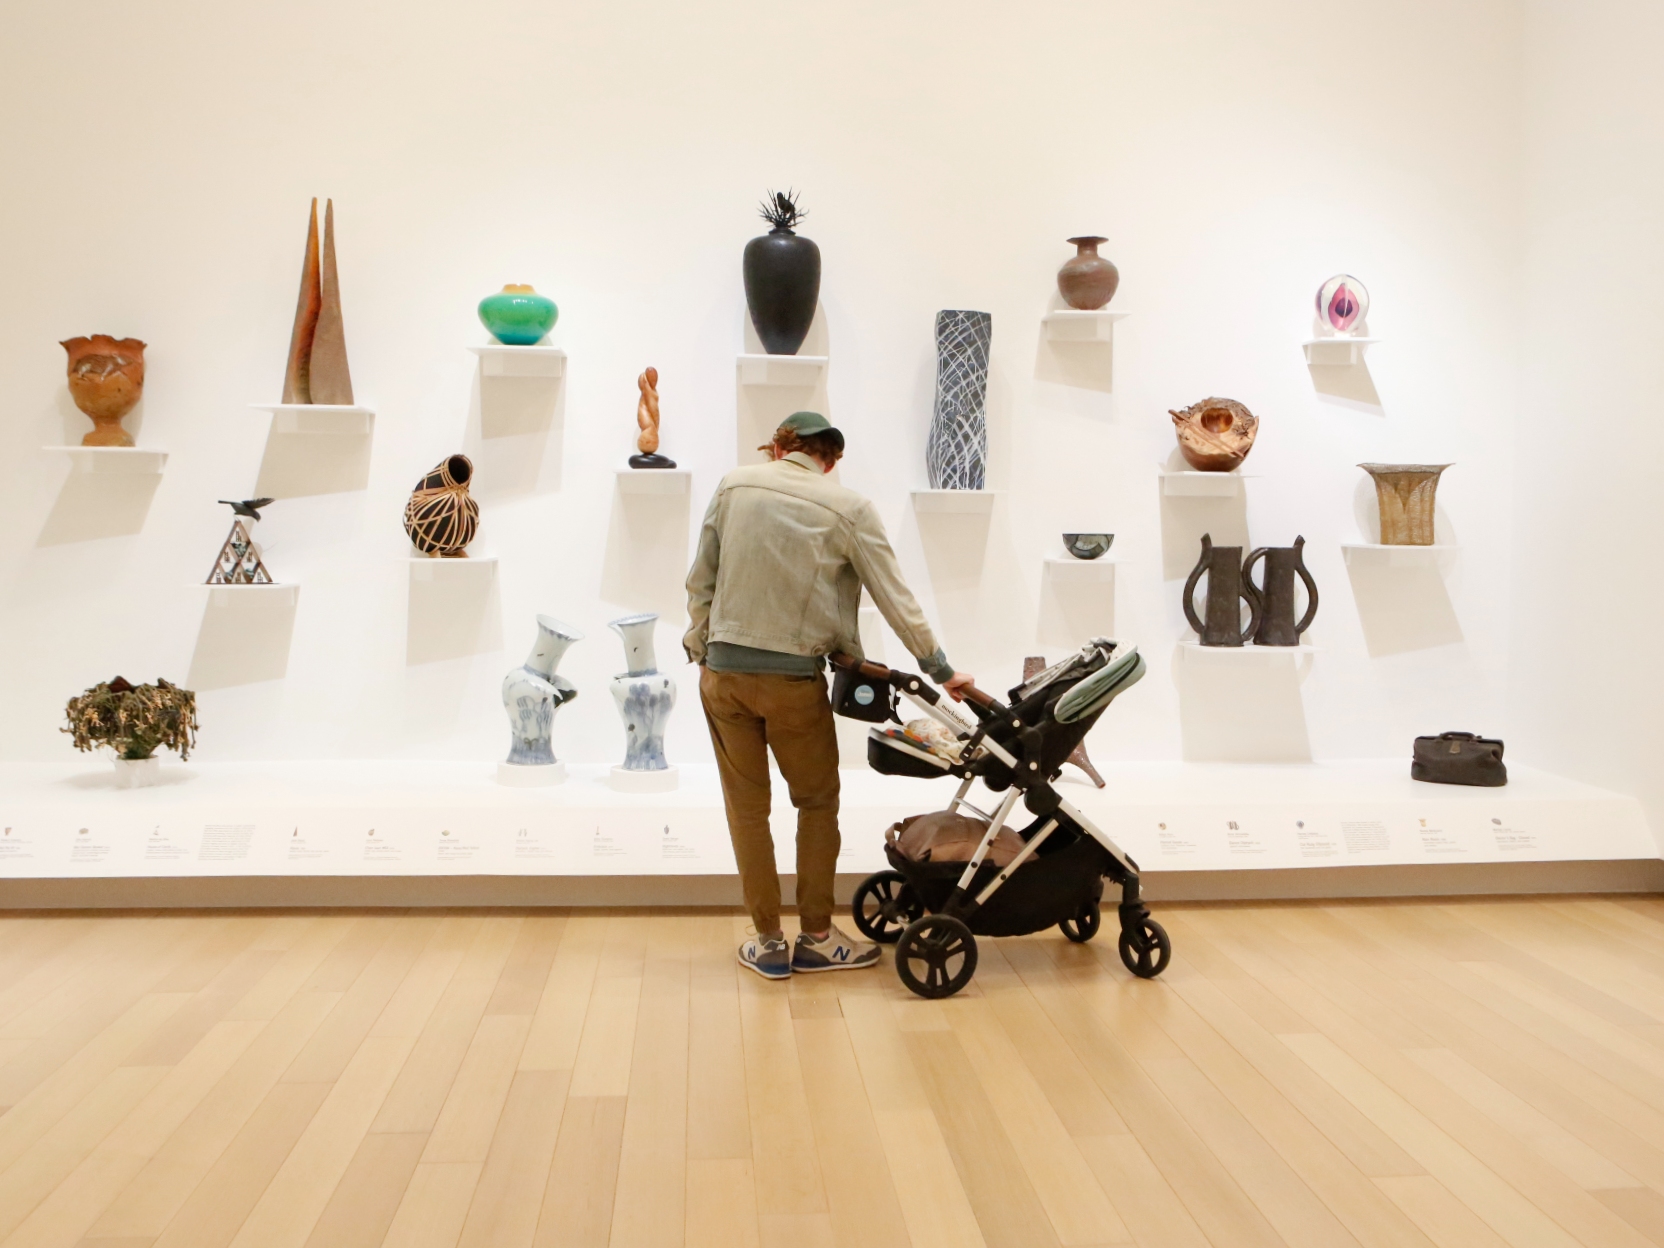 Photo of a man pushing a stroller in front of a wall in an art gallery displaying small ceramics on individual shelves.